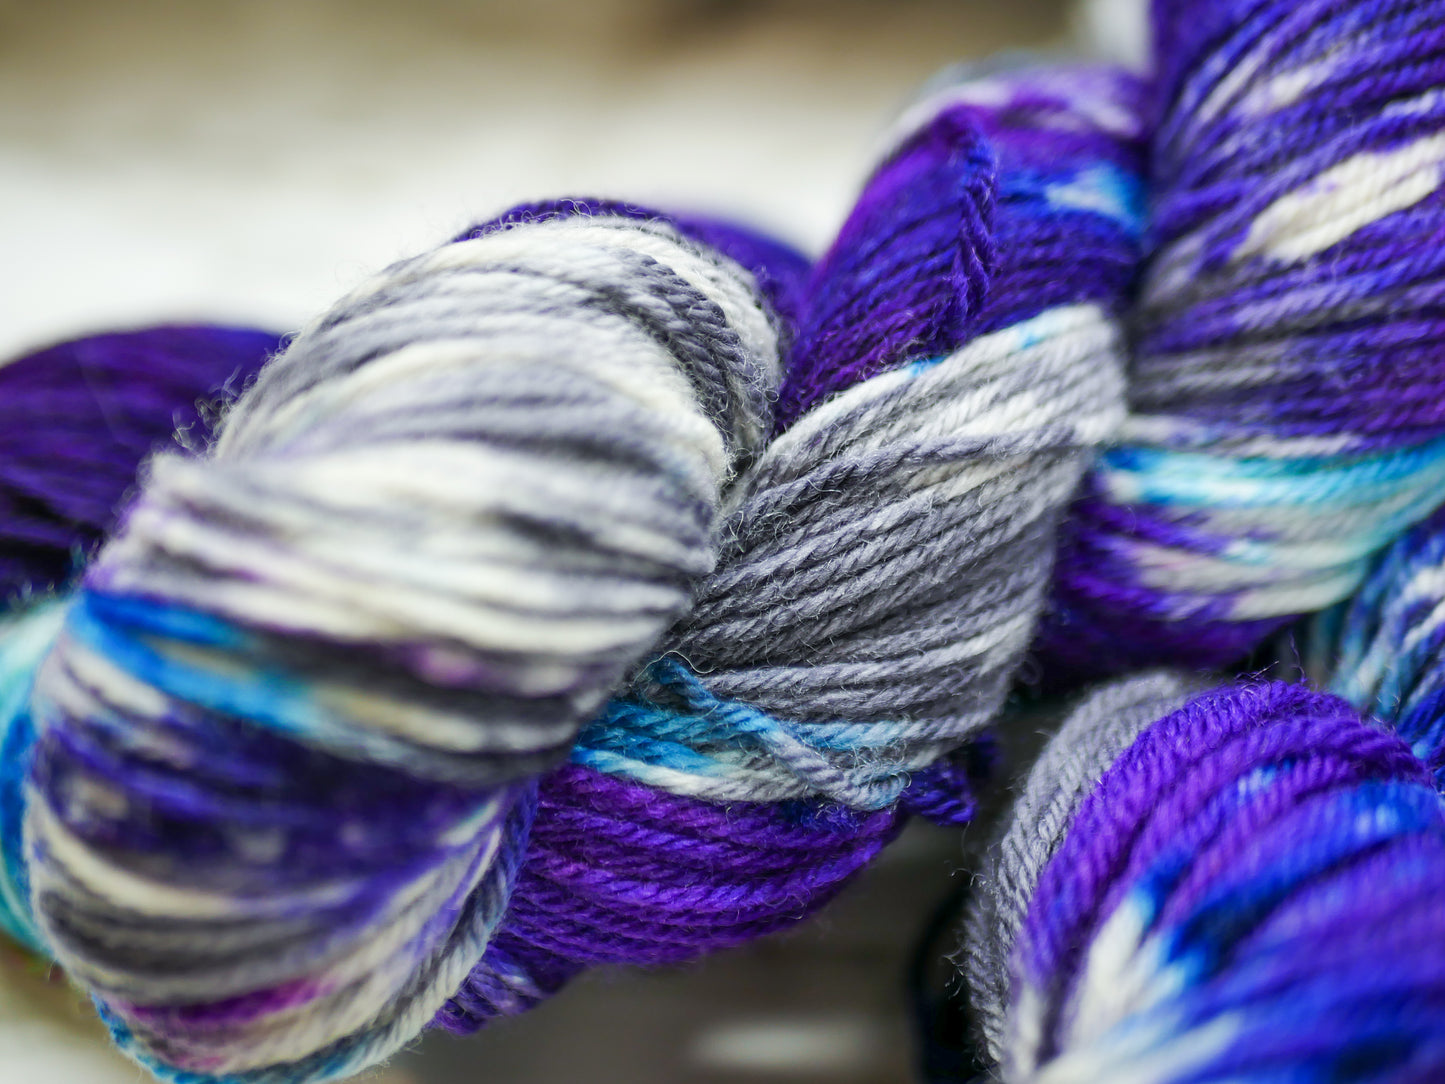 Handpainted 4 ply Worsted Weight Superwash Blue Faced Leicester yarn - Gadabout